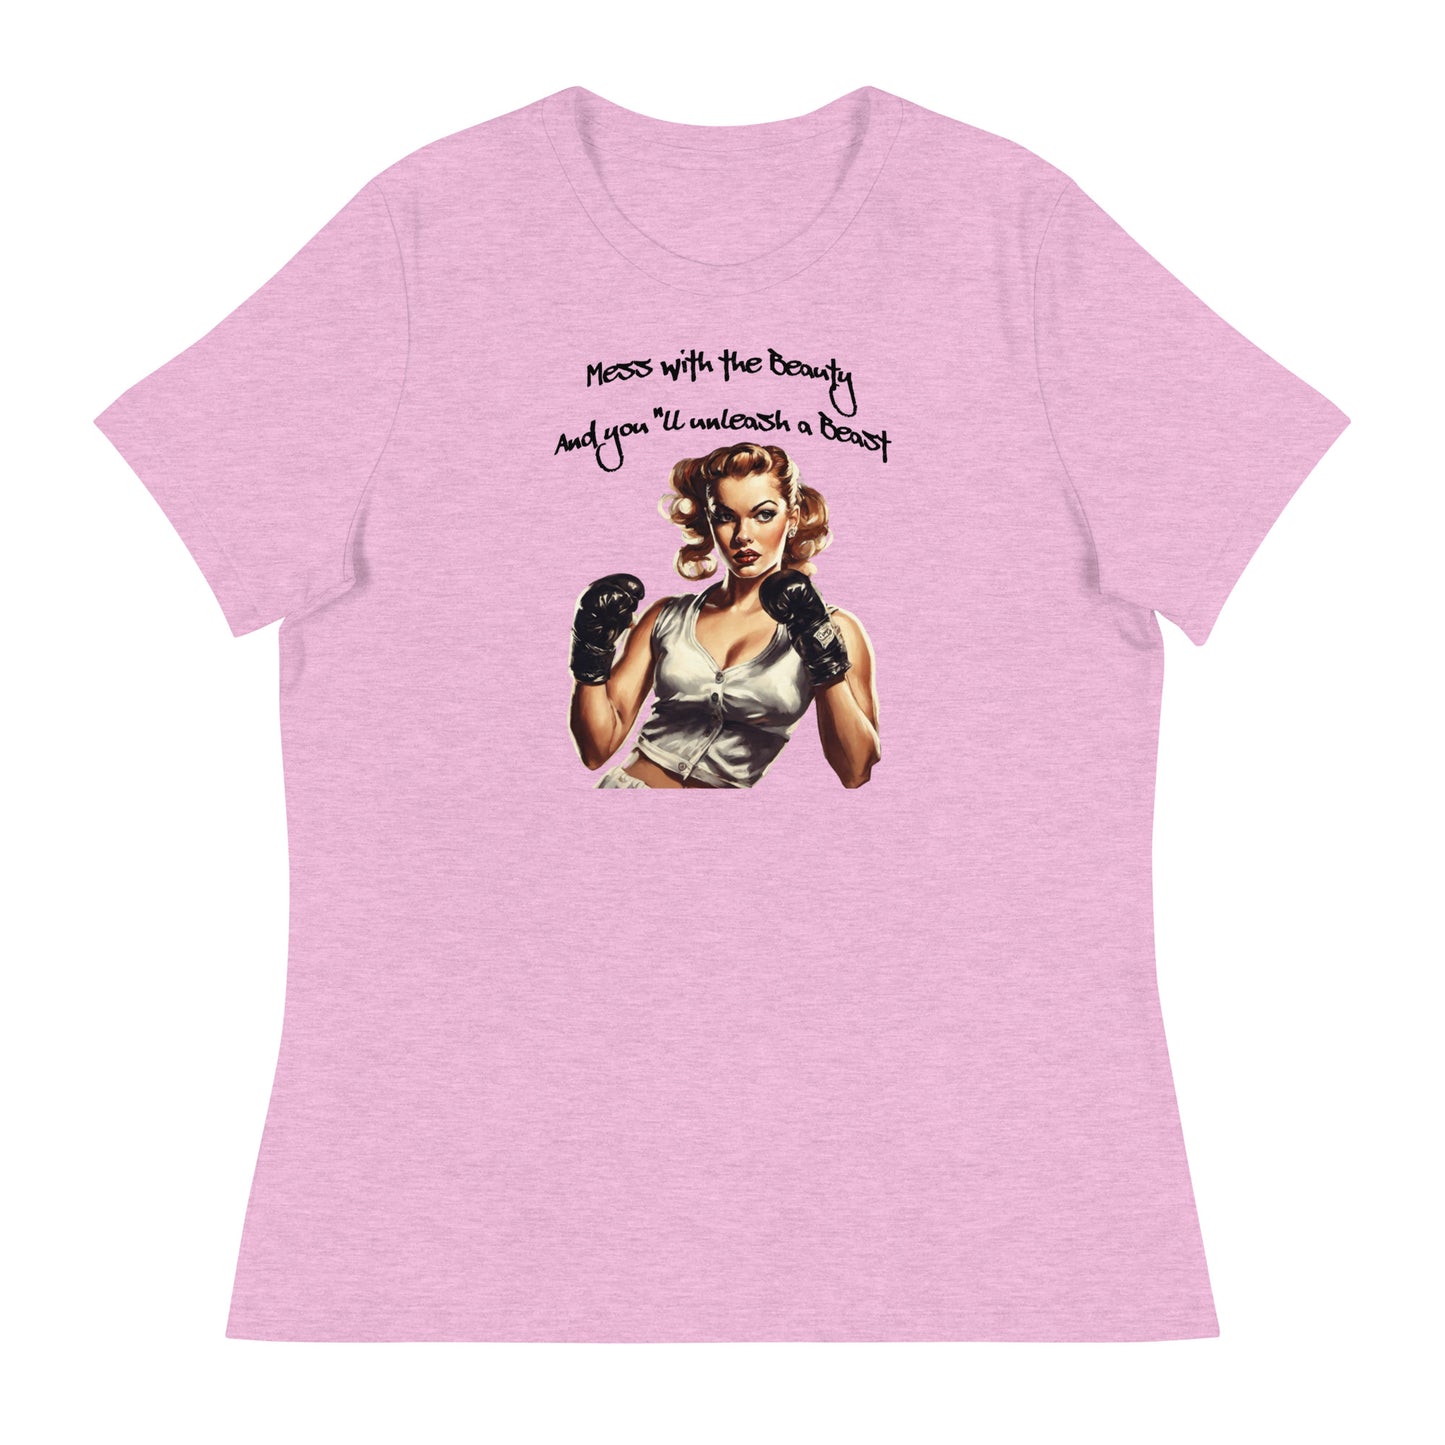 Mess with the Beauty, Unleash the Beast Women's Strength T-Shirt Heather Prism Lilac